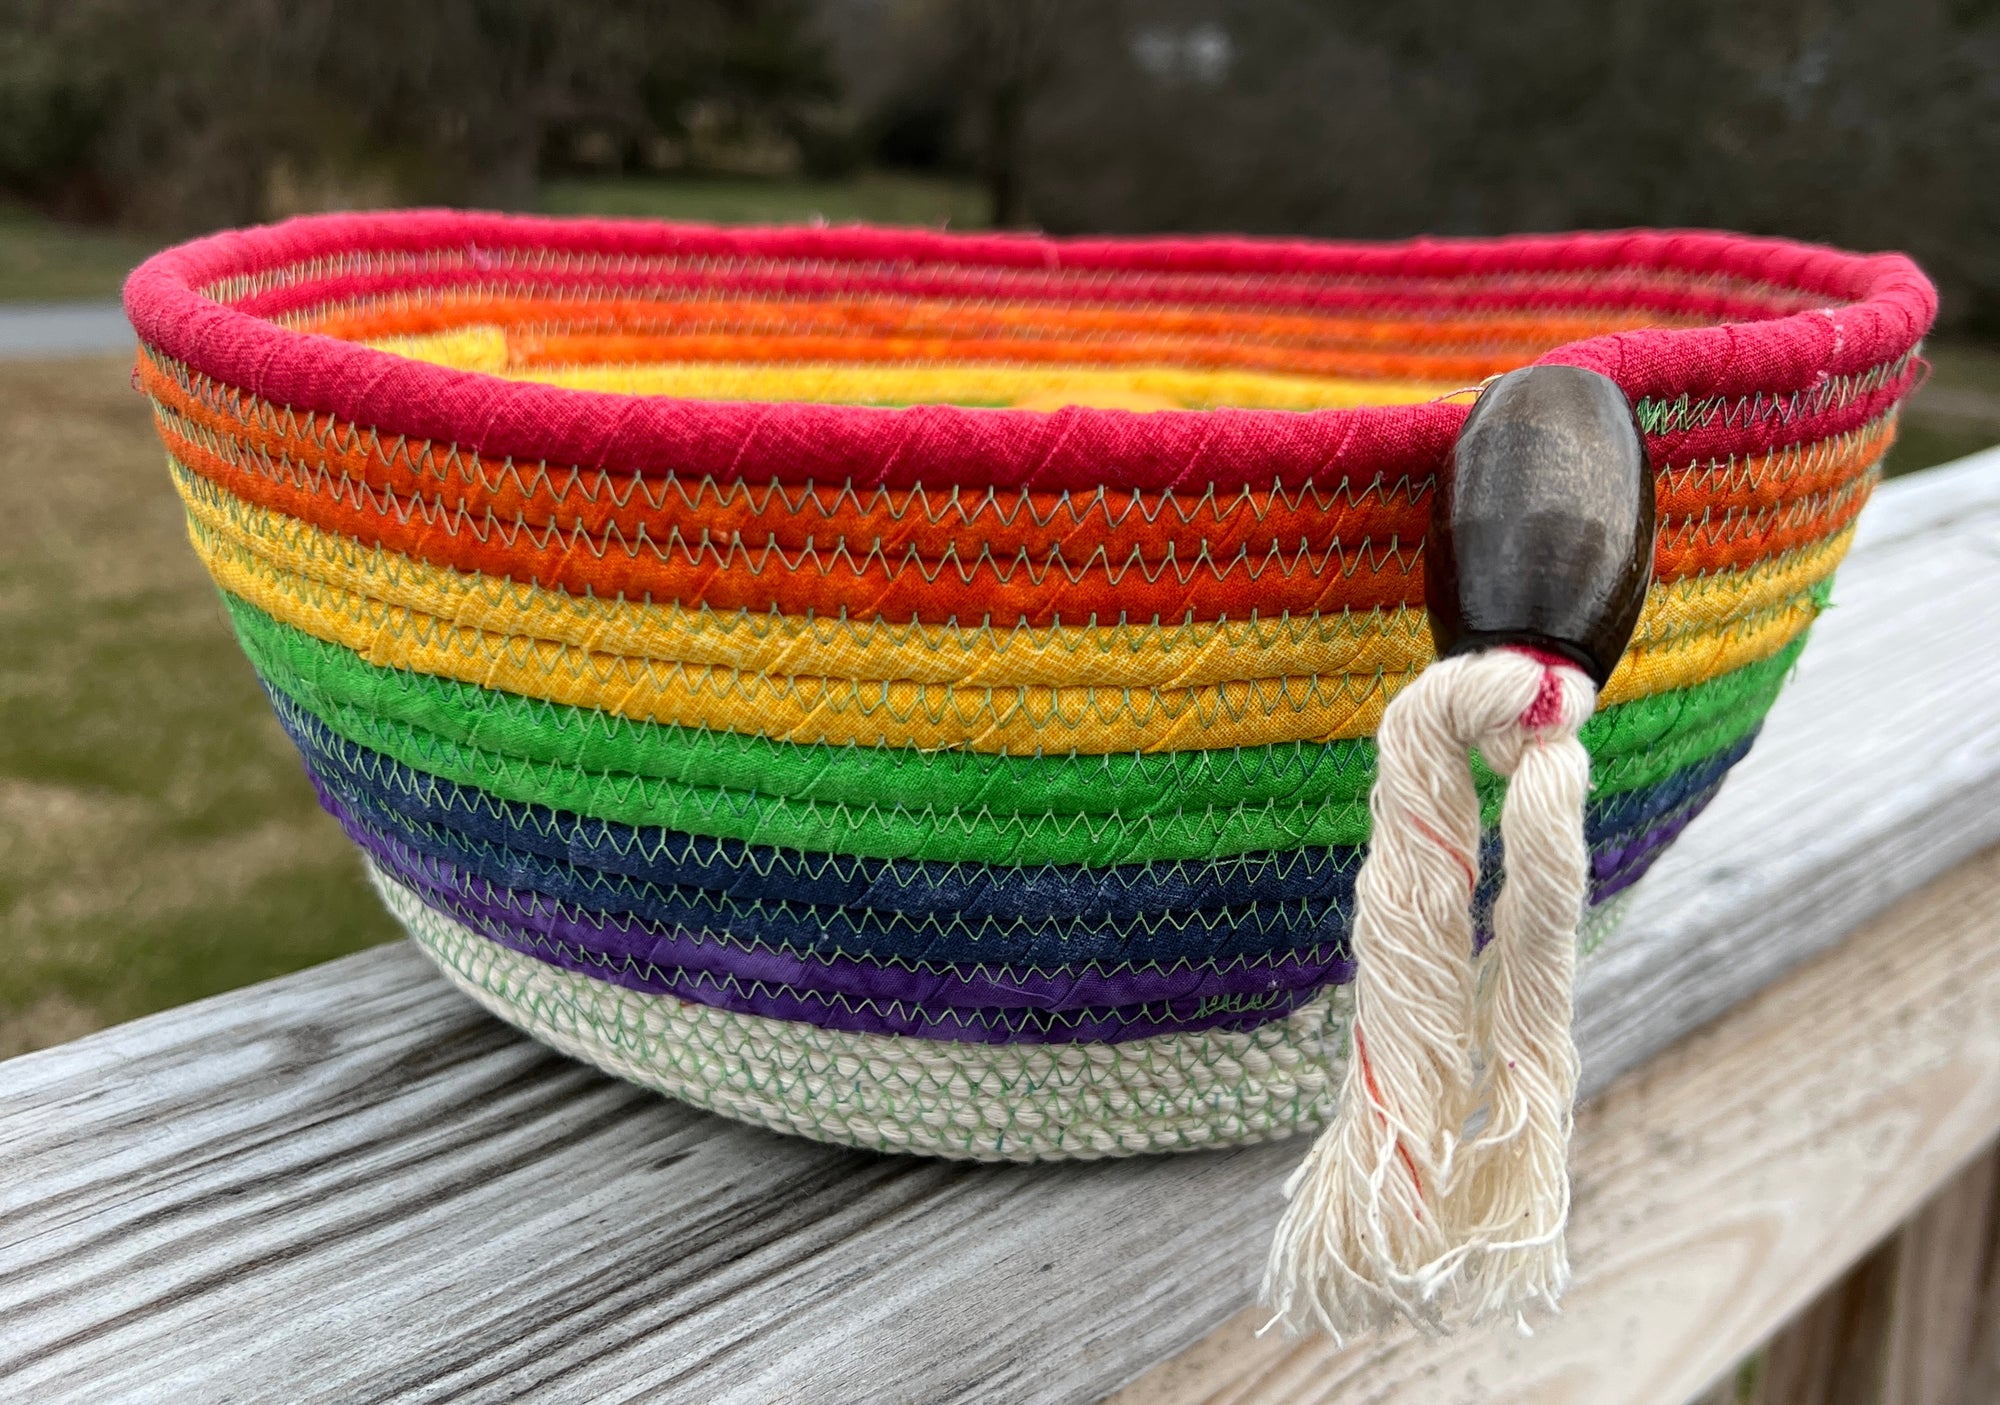 Coiled Rope Bowl - Large Fruit Bowl Size Eat the Rainbow